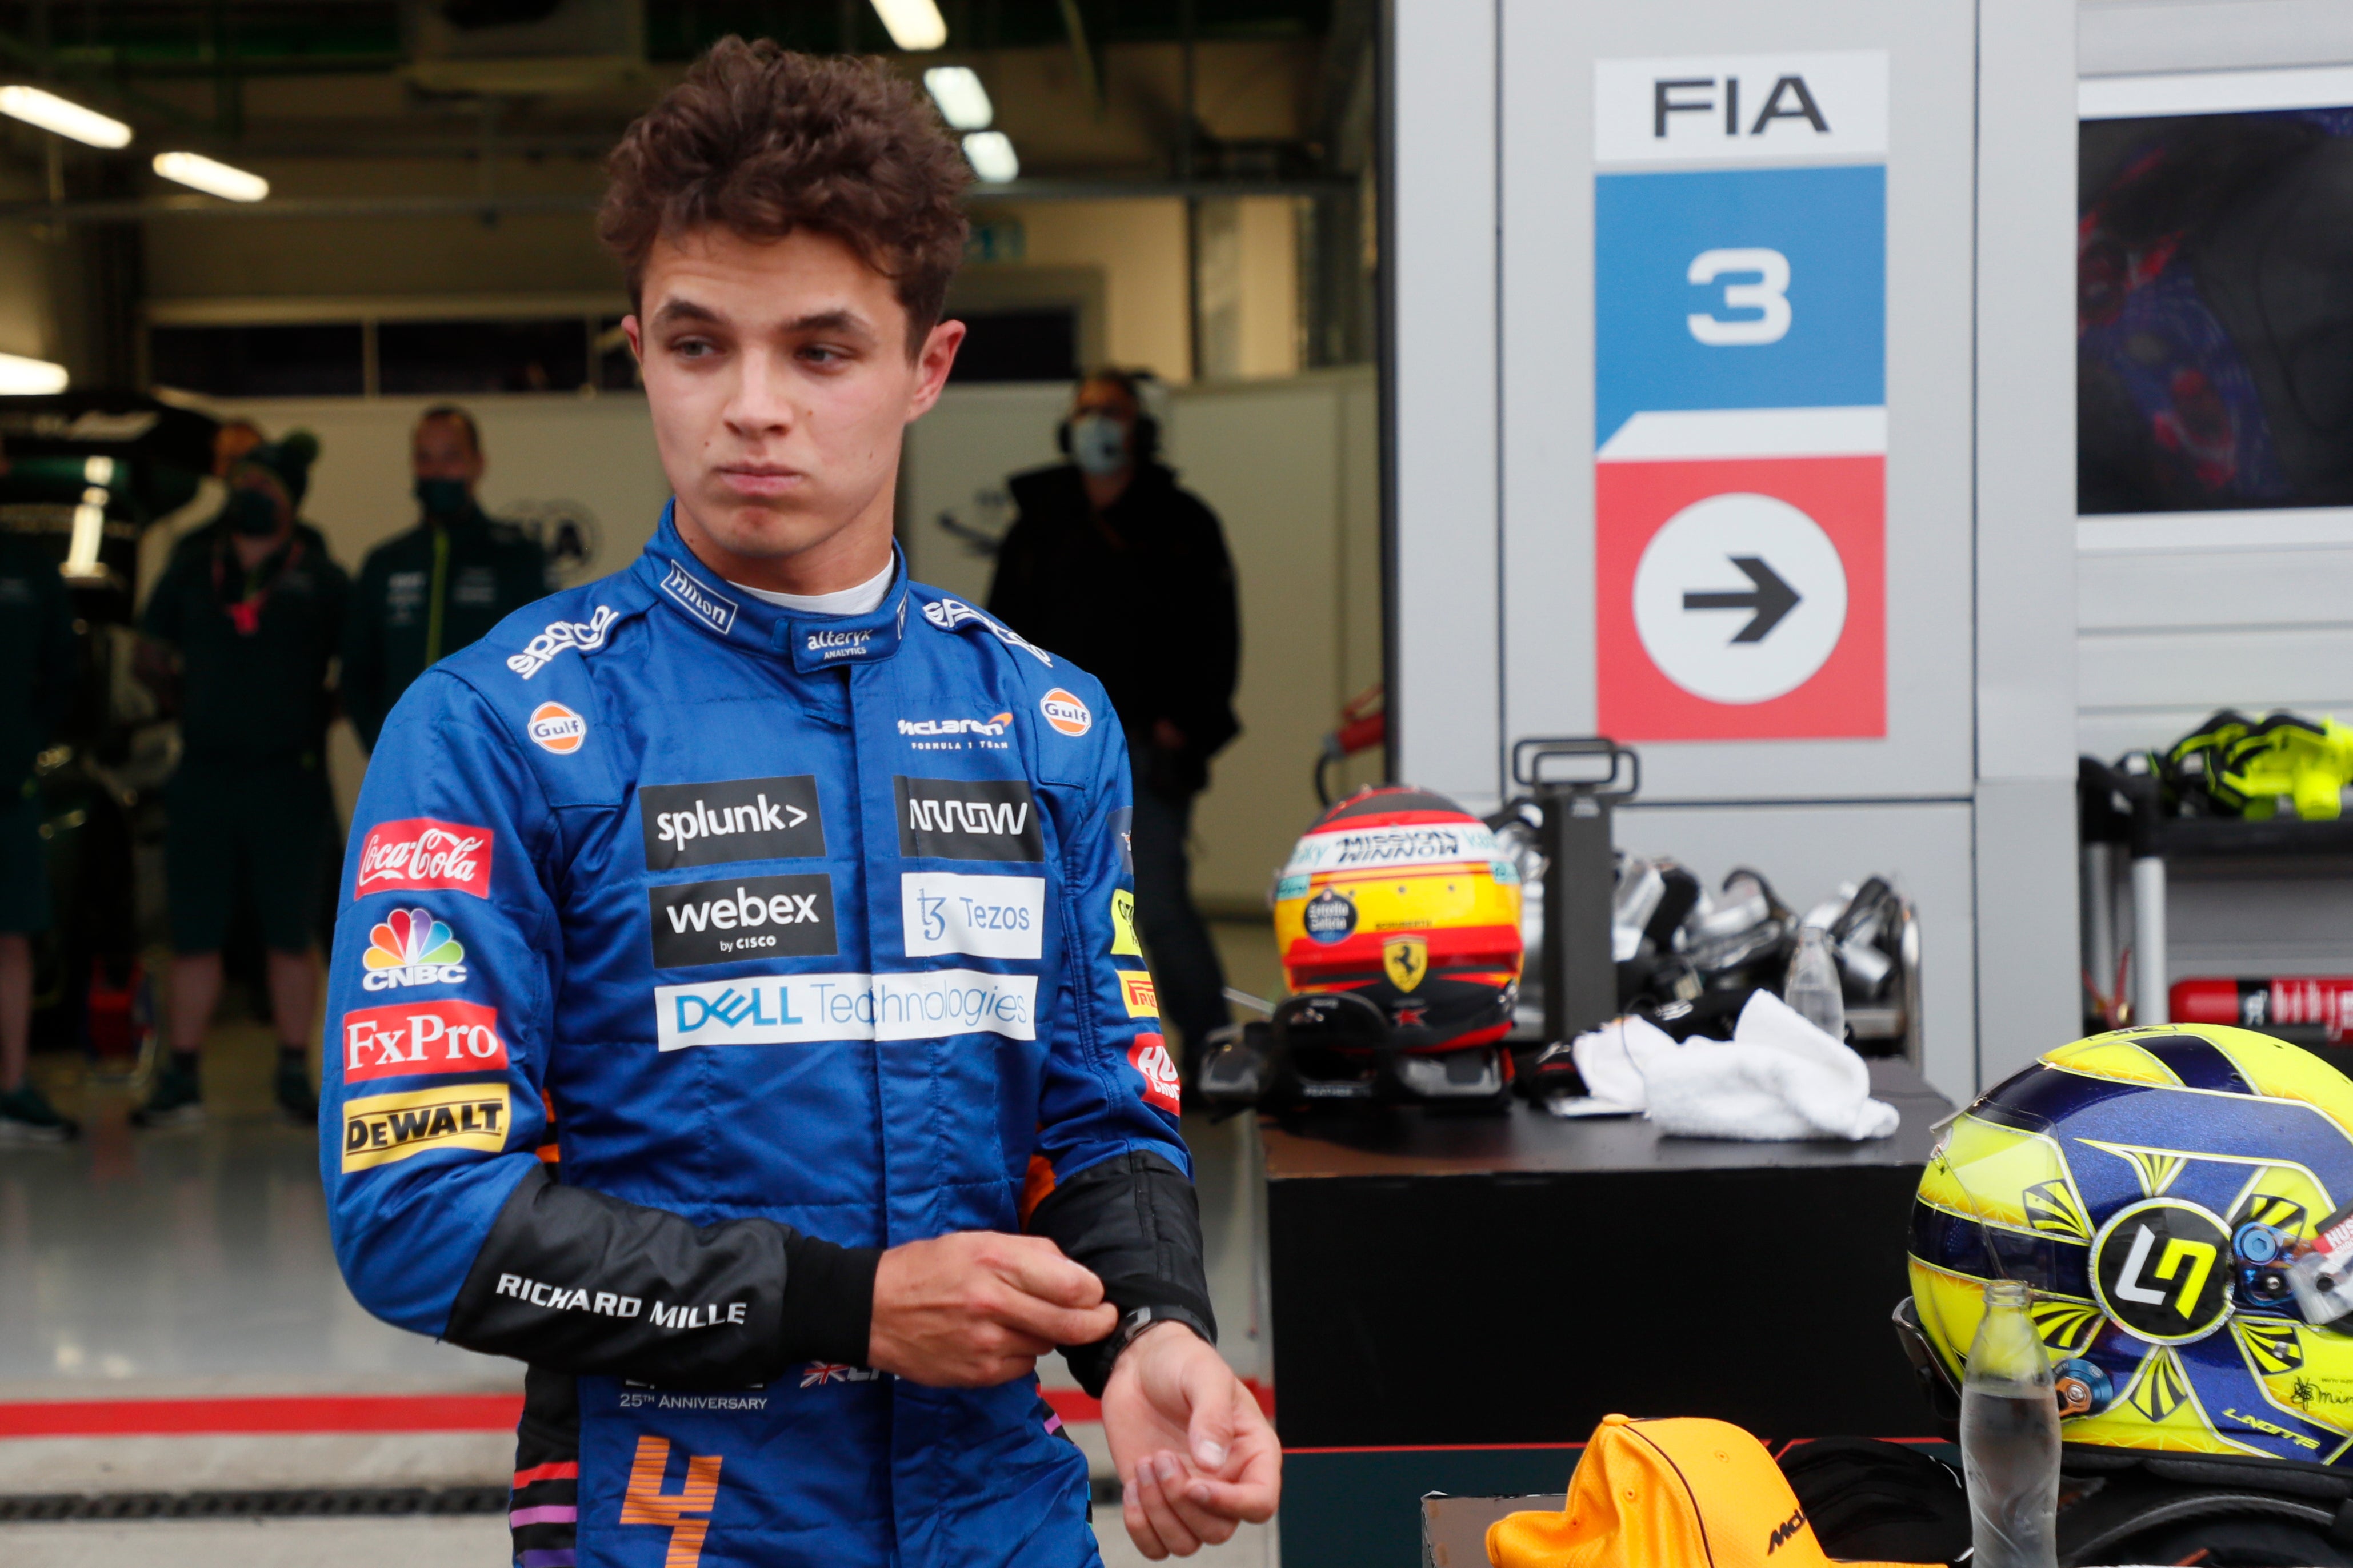 Lando Norris qualified on pole but failed to capitalise in Sochi